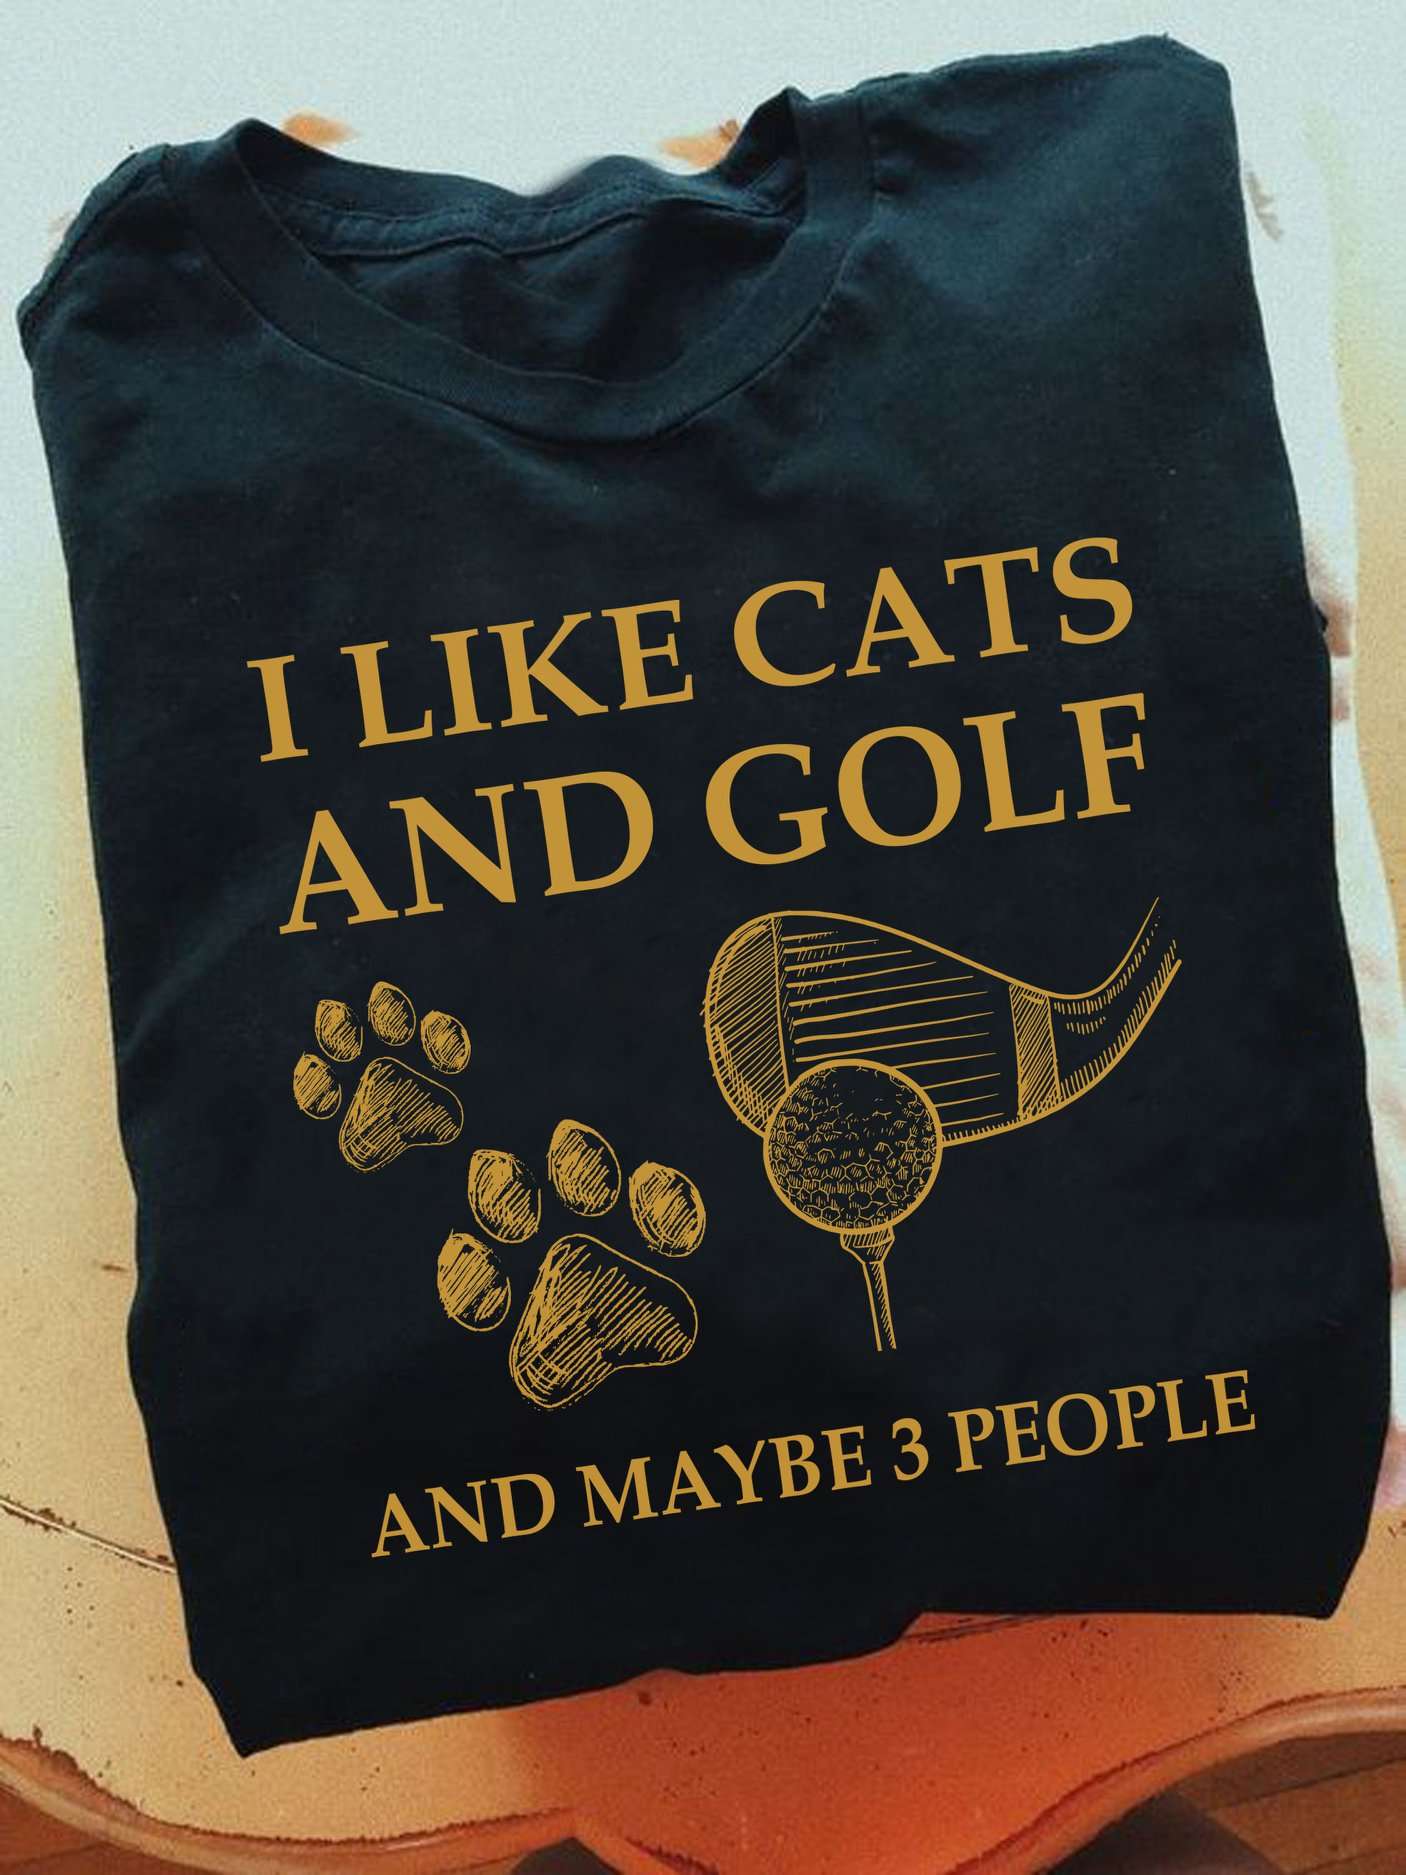 I like cats and golf and maybe 3 people - Golf sport and cat paws